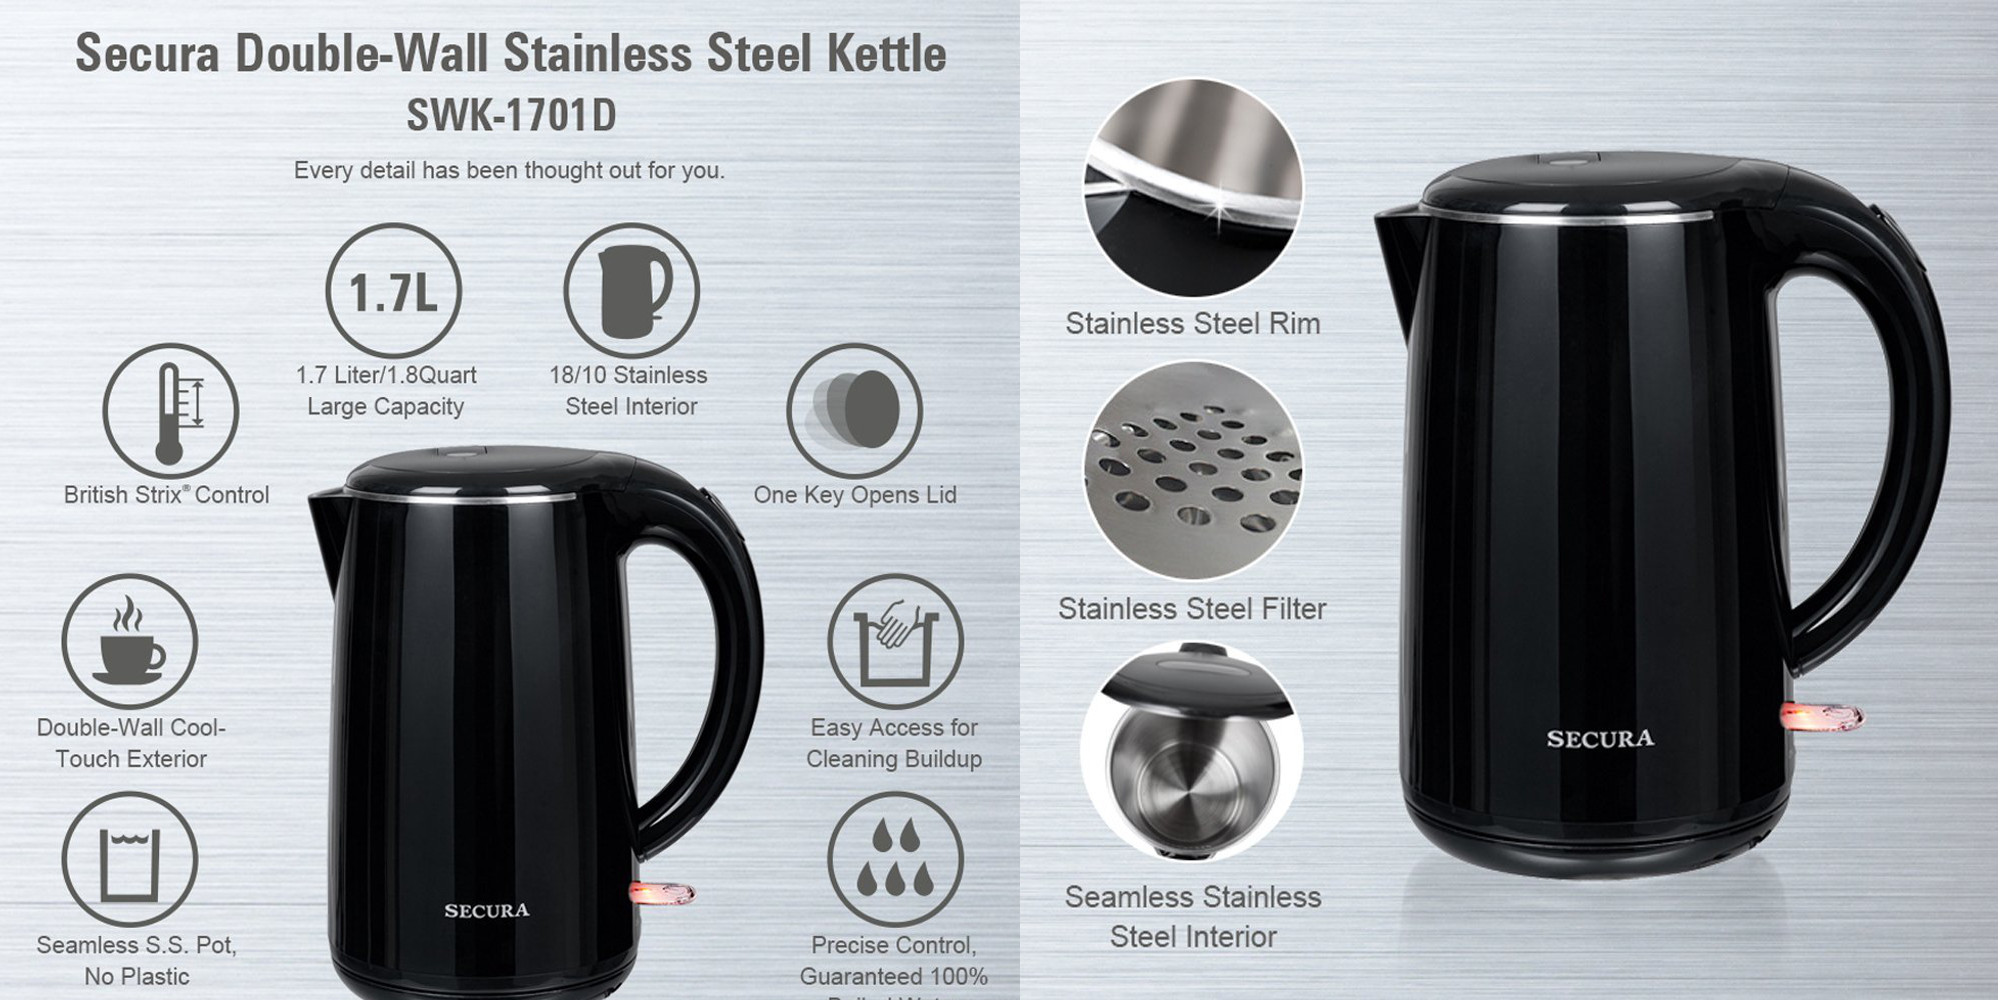 https://9to5toys.com/wp-content/uploads/sites/5/2018/05/secura-stainless-steel-double-wall-electric-water-kettle.jpg